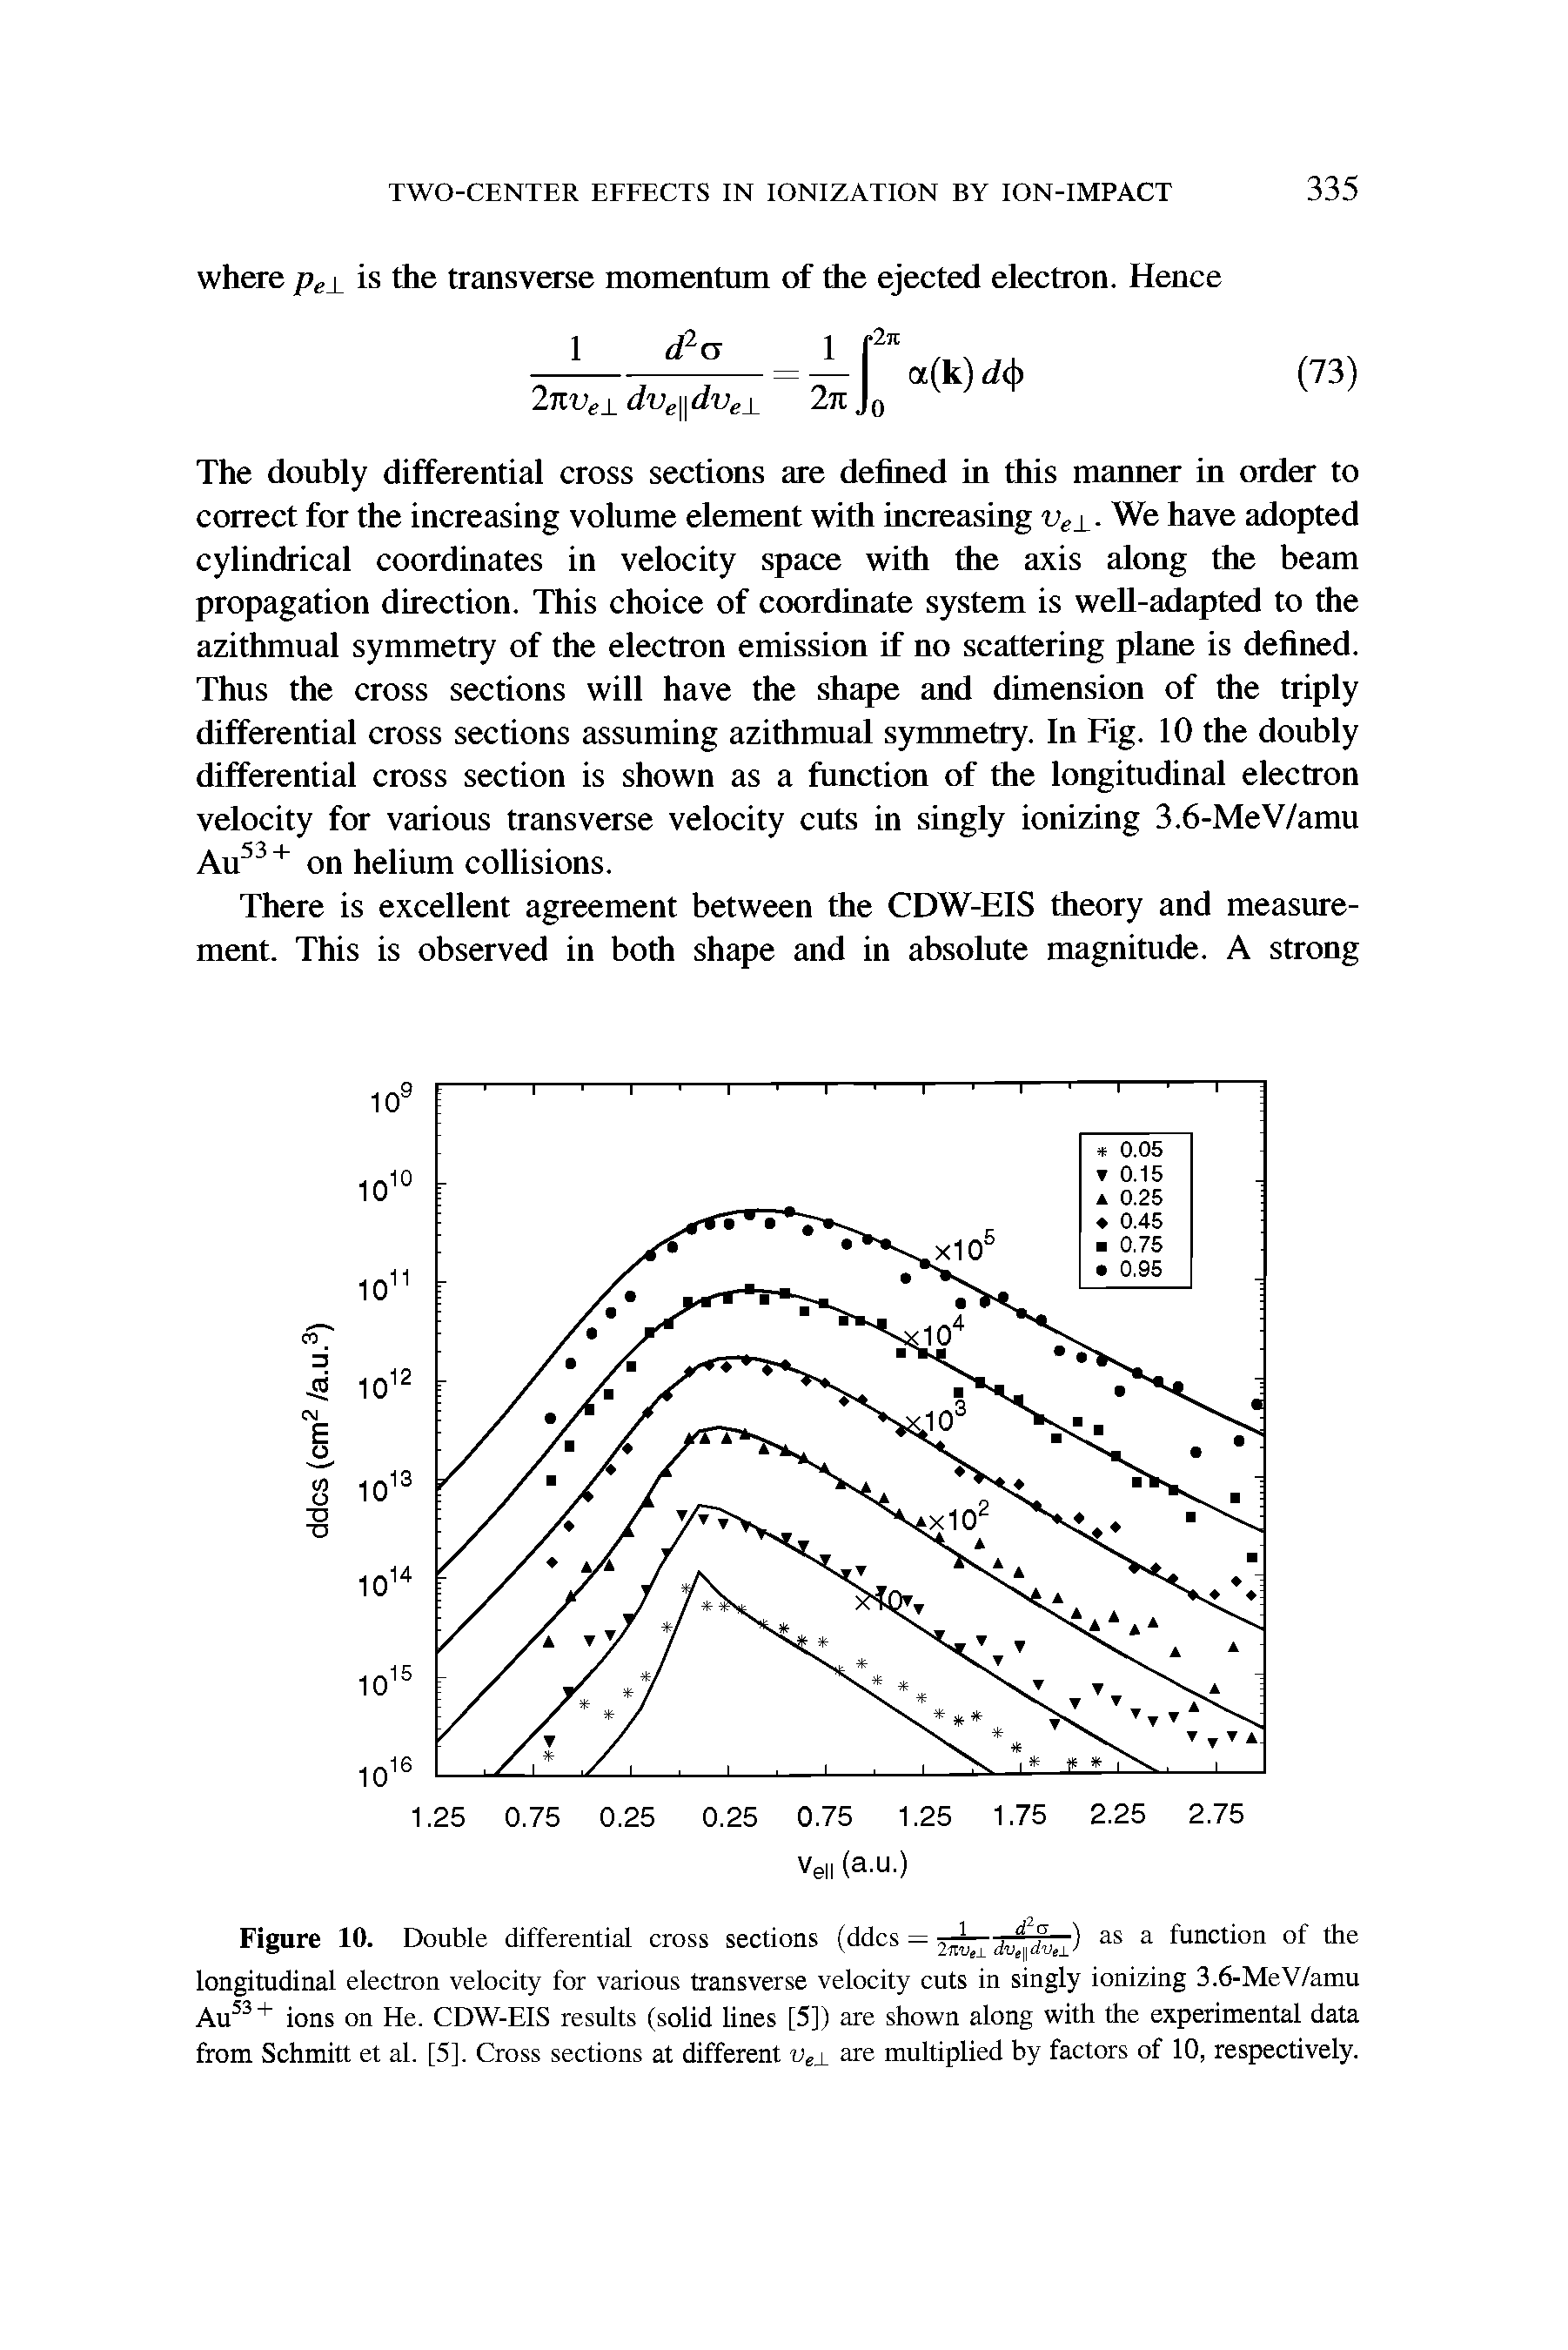 Figure 10. Double differential cross sections (ddcs = Avj <fo ) as a functi°n °f the longitudinal electron velocity for various transverse velocity cuts in singly ionizing 3.6-MeV/amu Au53+ ions on He. CDW-EIS results (solid lines [5]) are shown along with the experimental data from Schmitt et al. [5], Cross sections at different vex are multiplied by factors of 10, respectively.